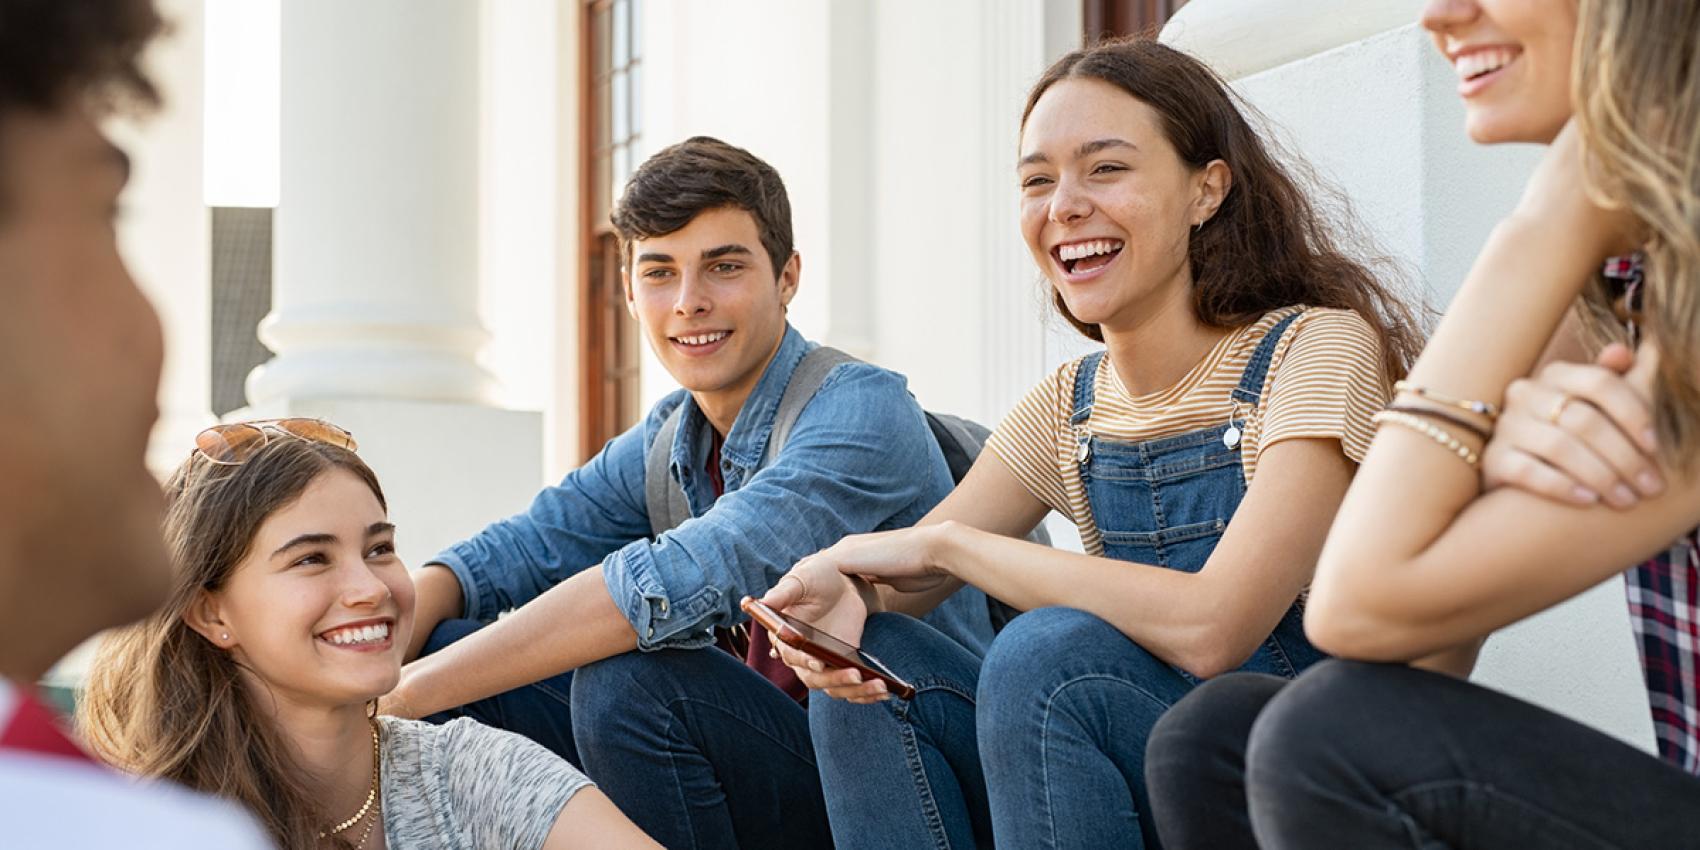 stock photo of friends sitting and laughing